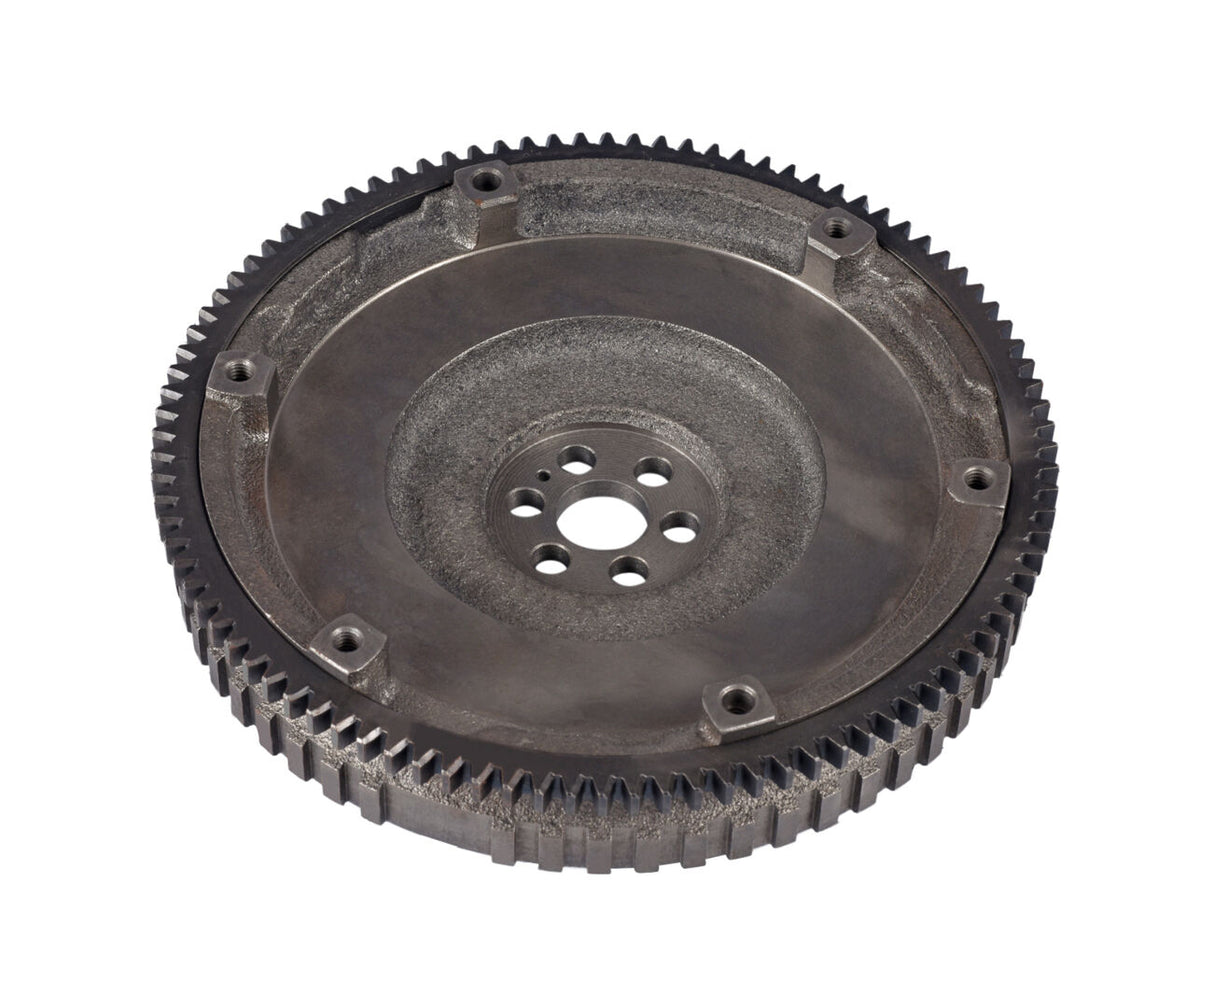 70003403 Gear, Ring | JLG - BHE Parts Store